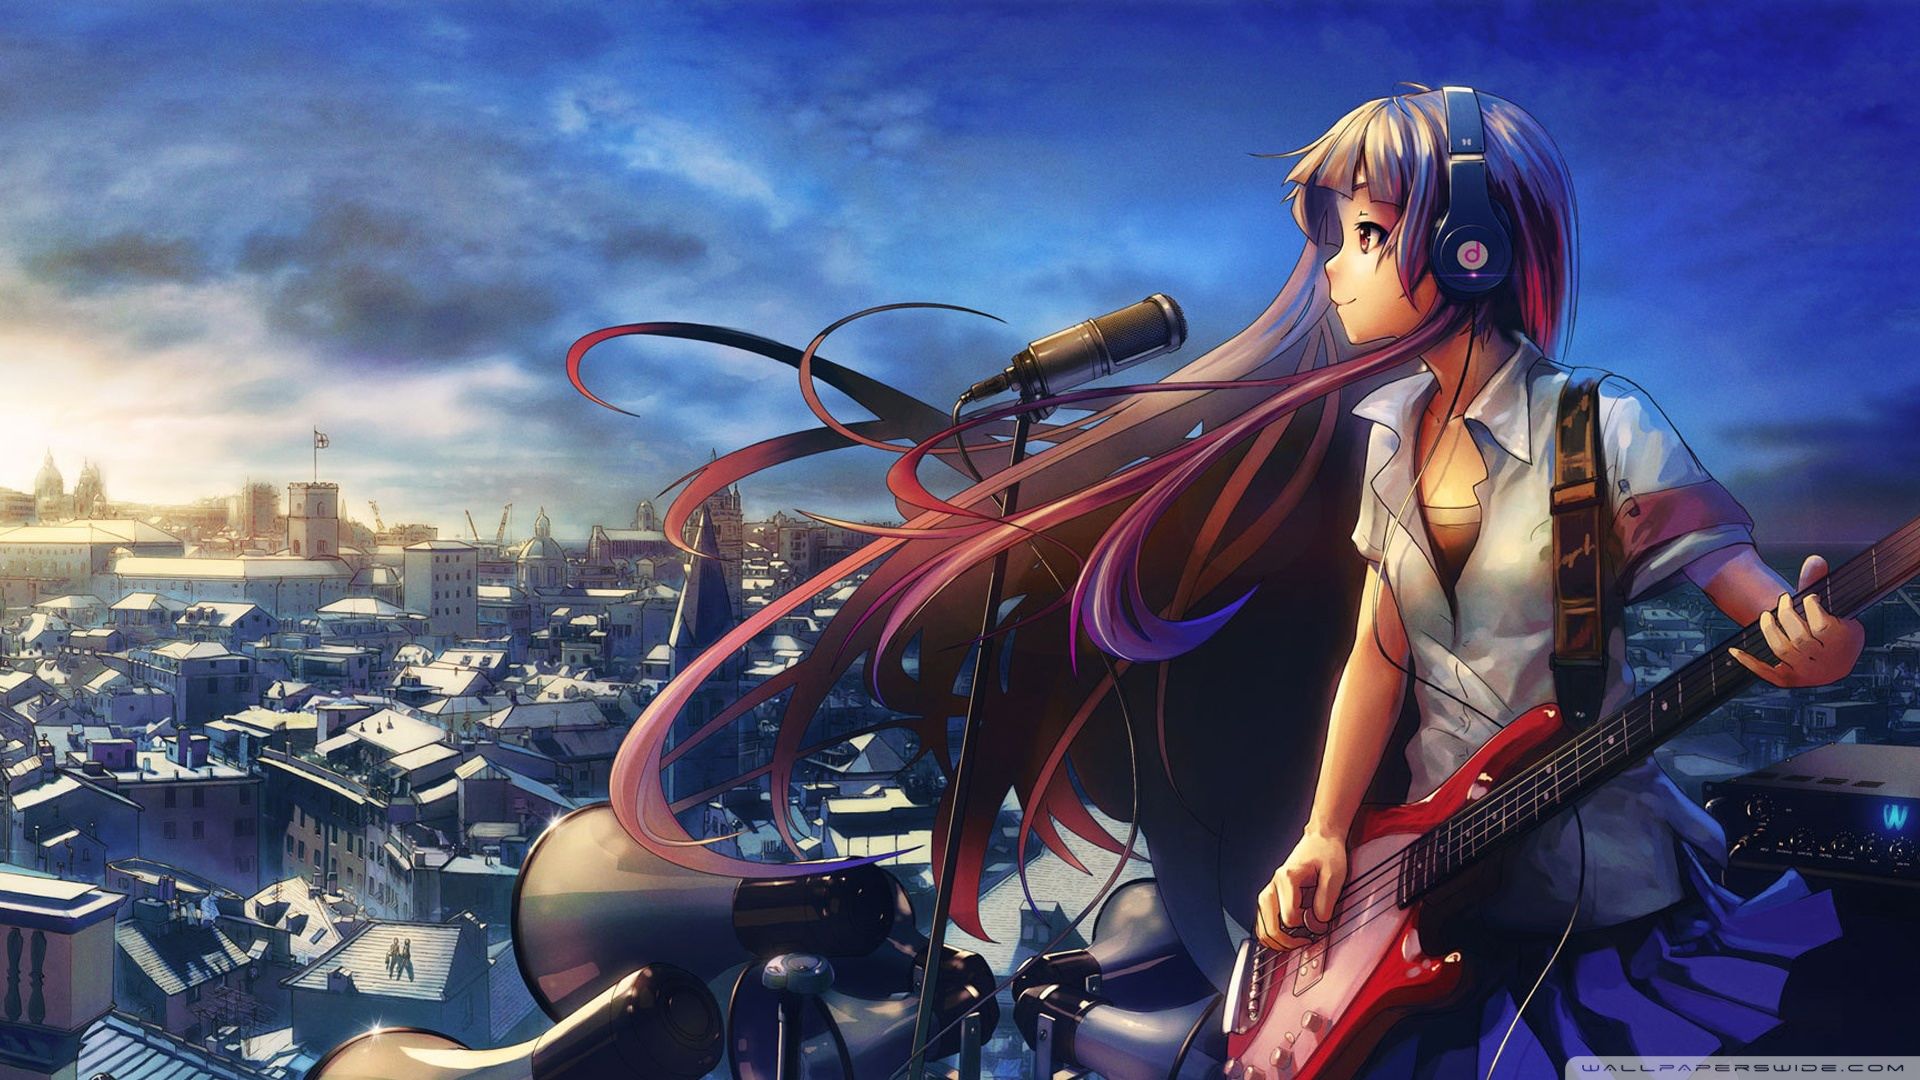 Anime Background, Wallpaper, Image, Picture. Design